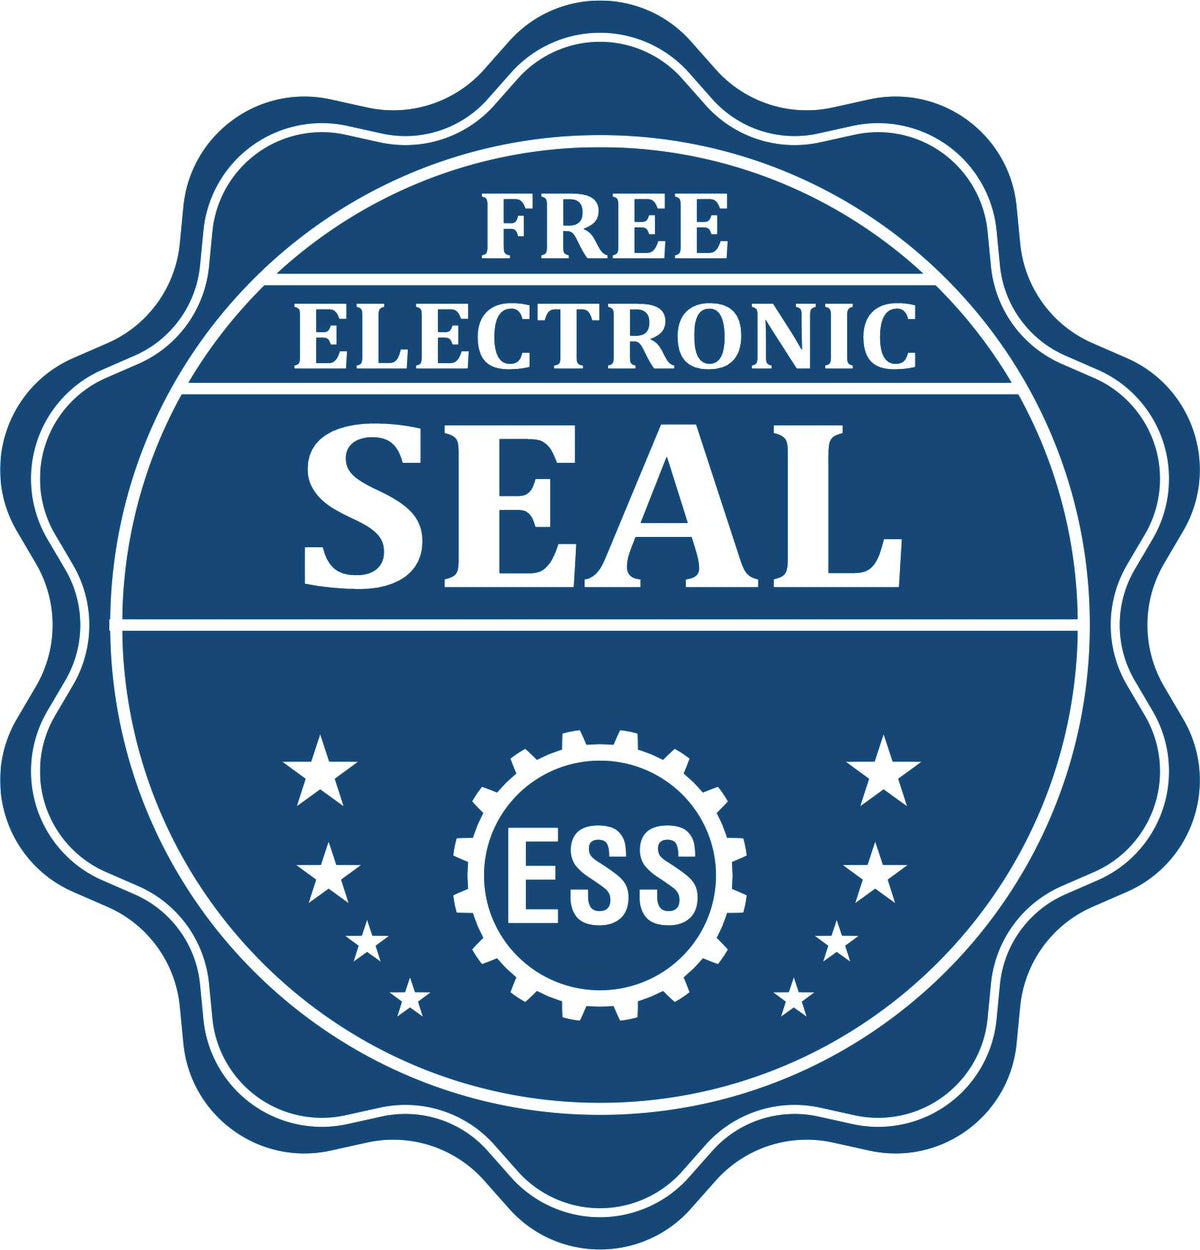 A badge showing a free electronic seal for the Self-Inking Montana Landscape Architect Stamp with stars and the ESS gear on the emblem.